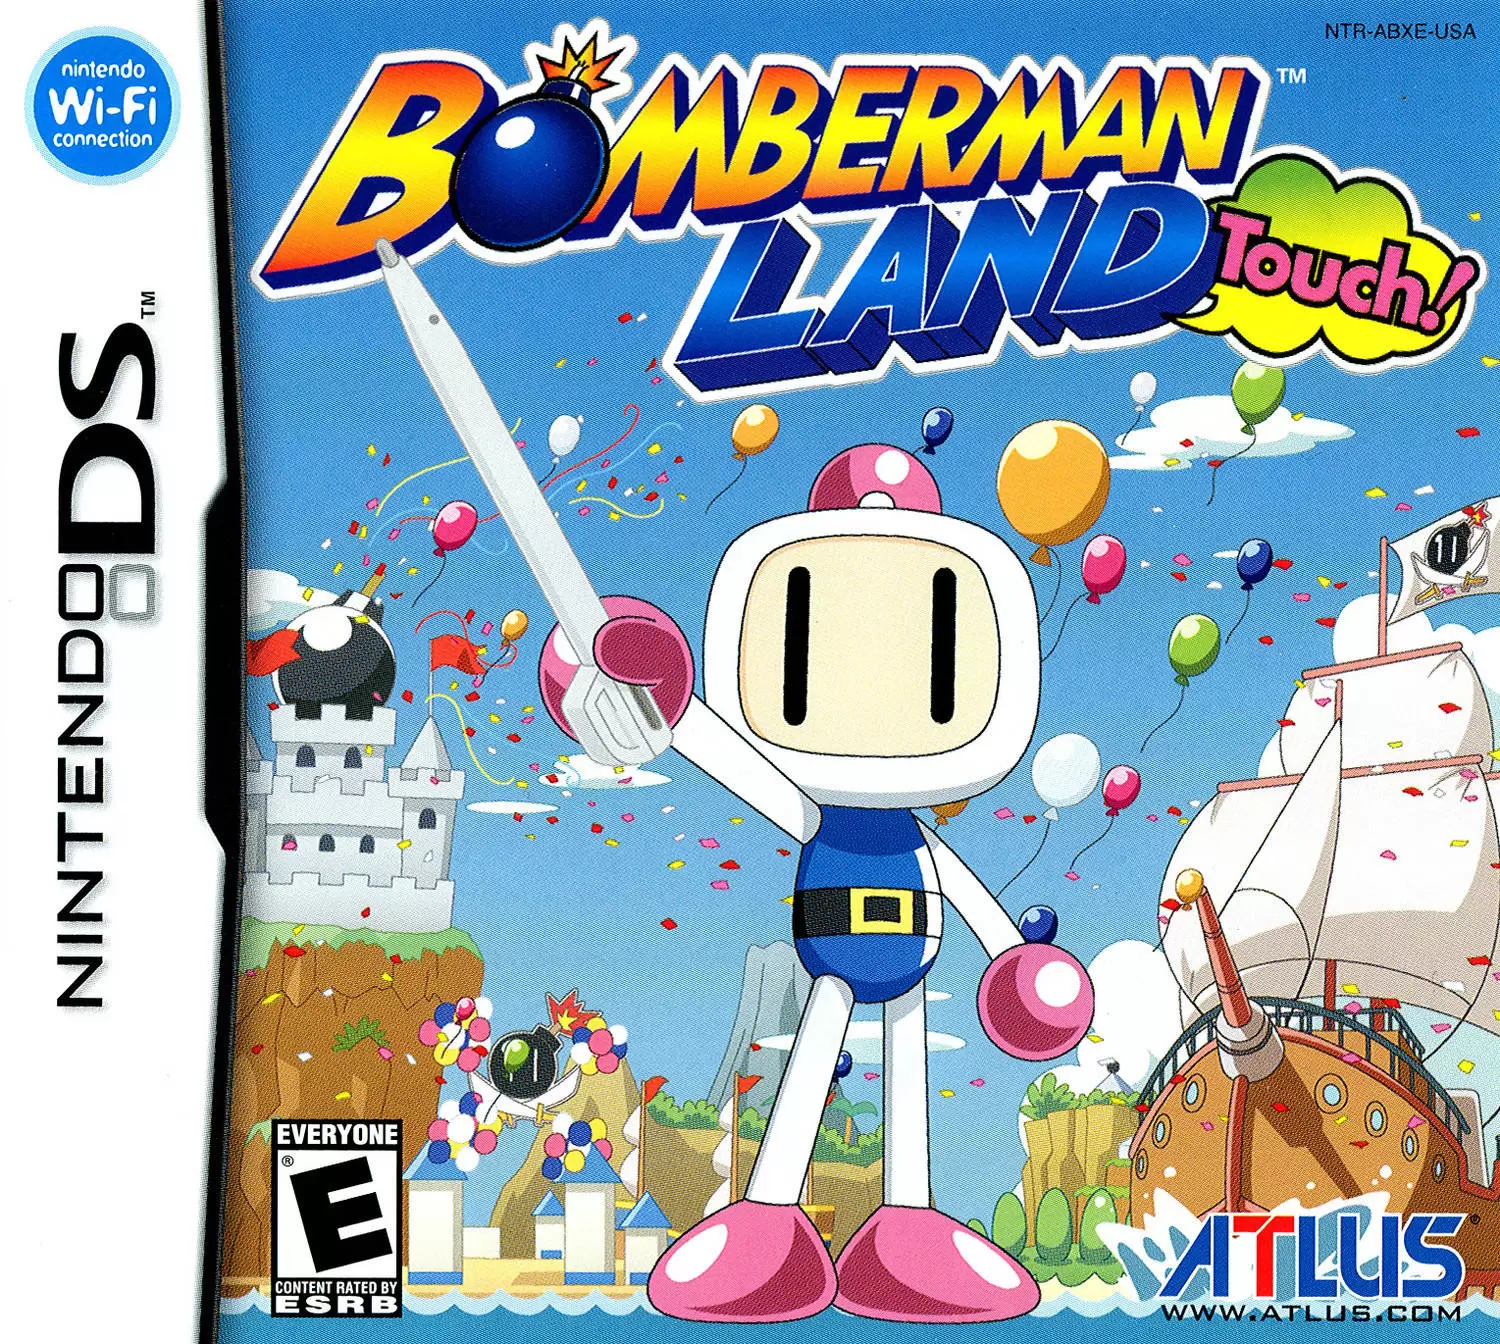 Nintendo DS Games - Bomberman Land Touch!